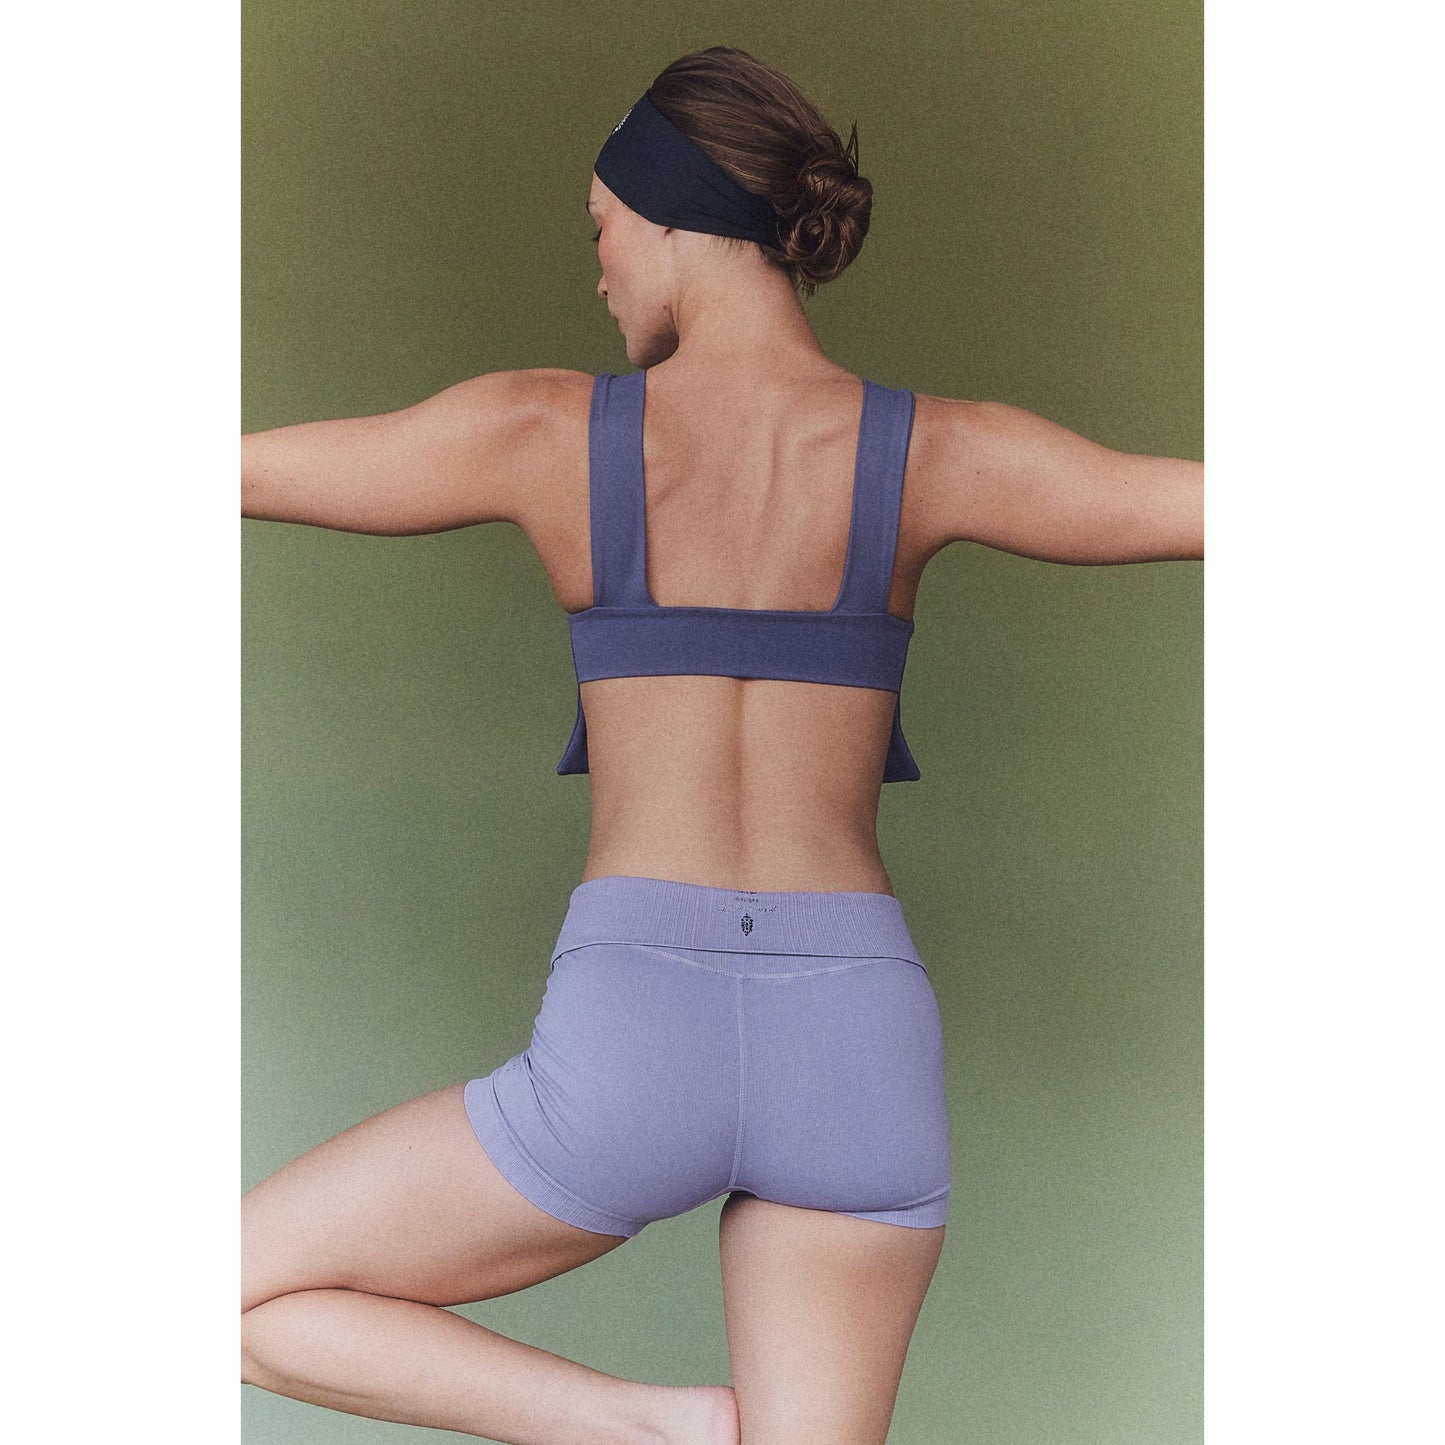 A woman in a purple Be Right Back Cami sports bra and shorts made of seamless fabric, stretching her arms back, wearing a headband, against a green background.